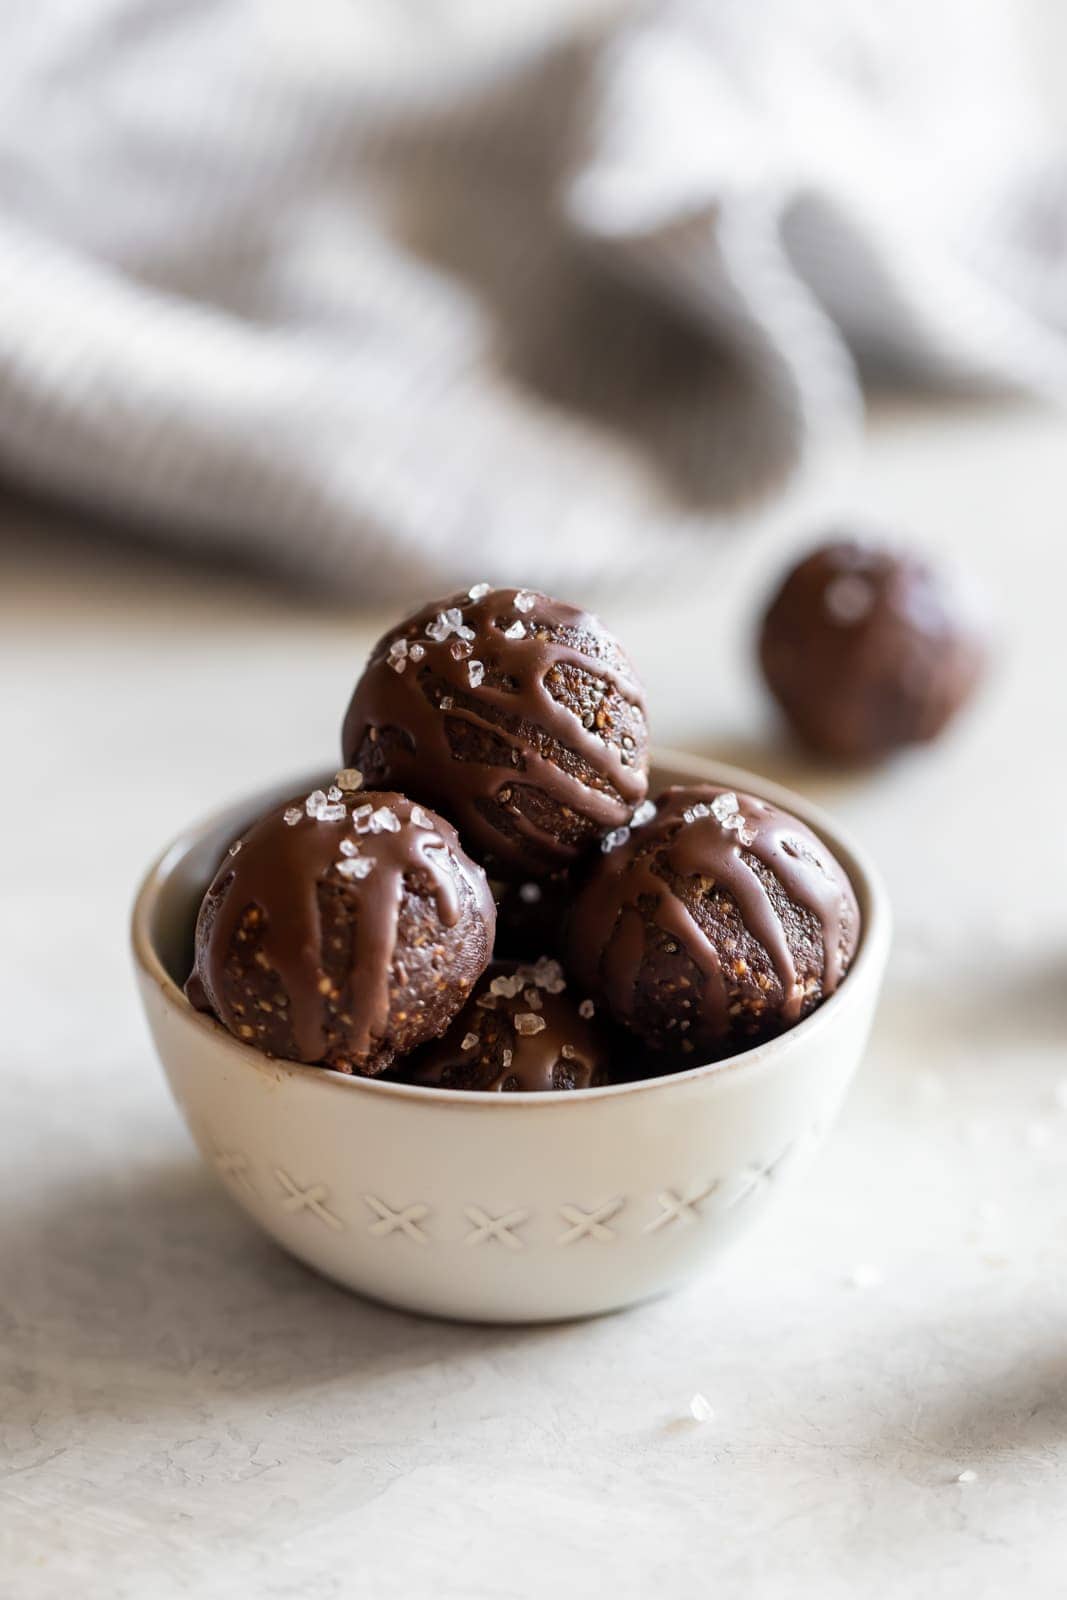 Refined sugar-free, paleo dark chocolate mint energy bites packed with healthy fat and fiber. Delicious on-the-go chocolatey snack with a hint of mint!